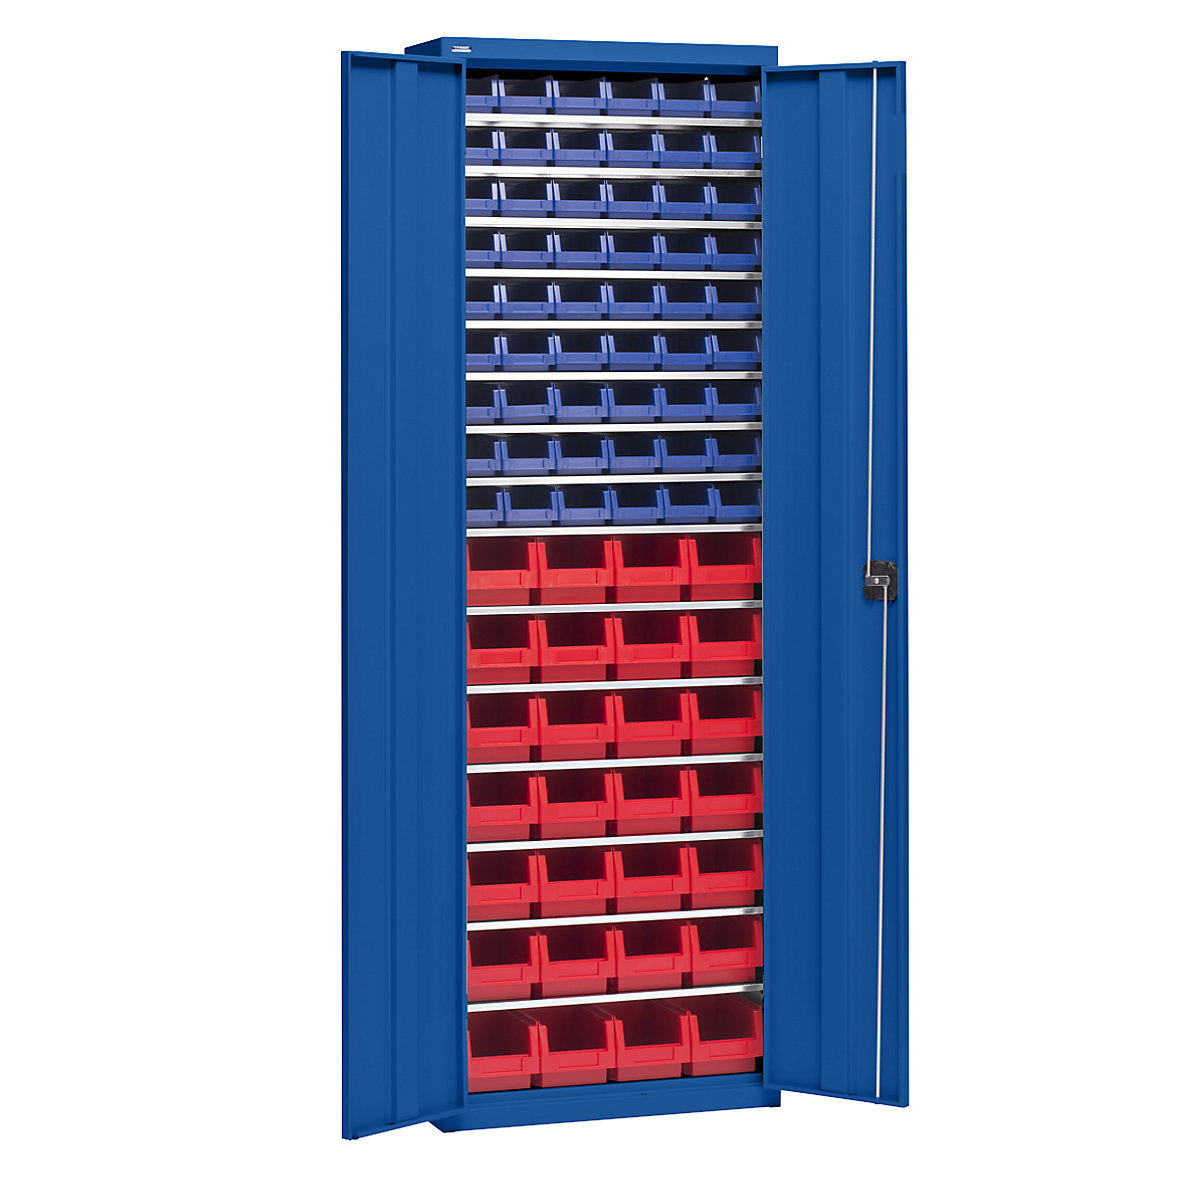 Storage cupboard with storage boxes – eurokraft pro, height 2000 mm, 15 shelves, gentian blue-6